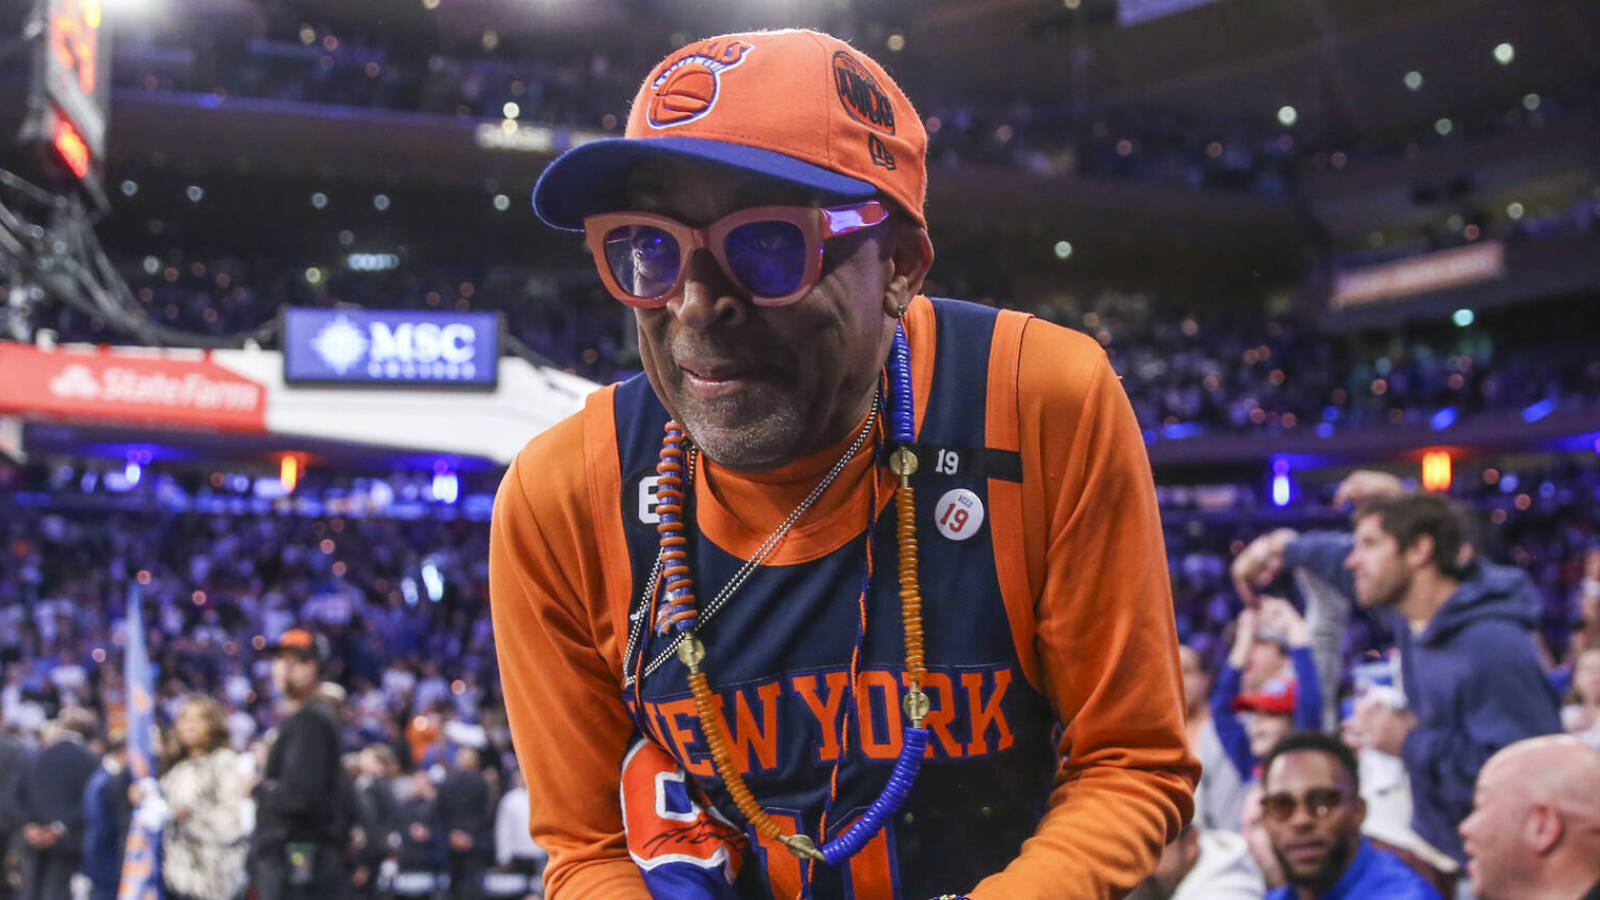 Ticket prices for Heat-Knicks series are bonkers expensive